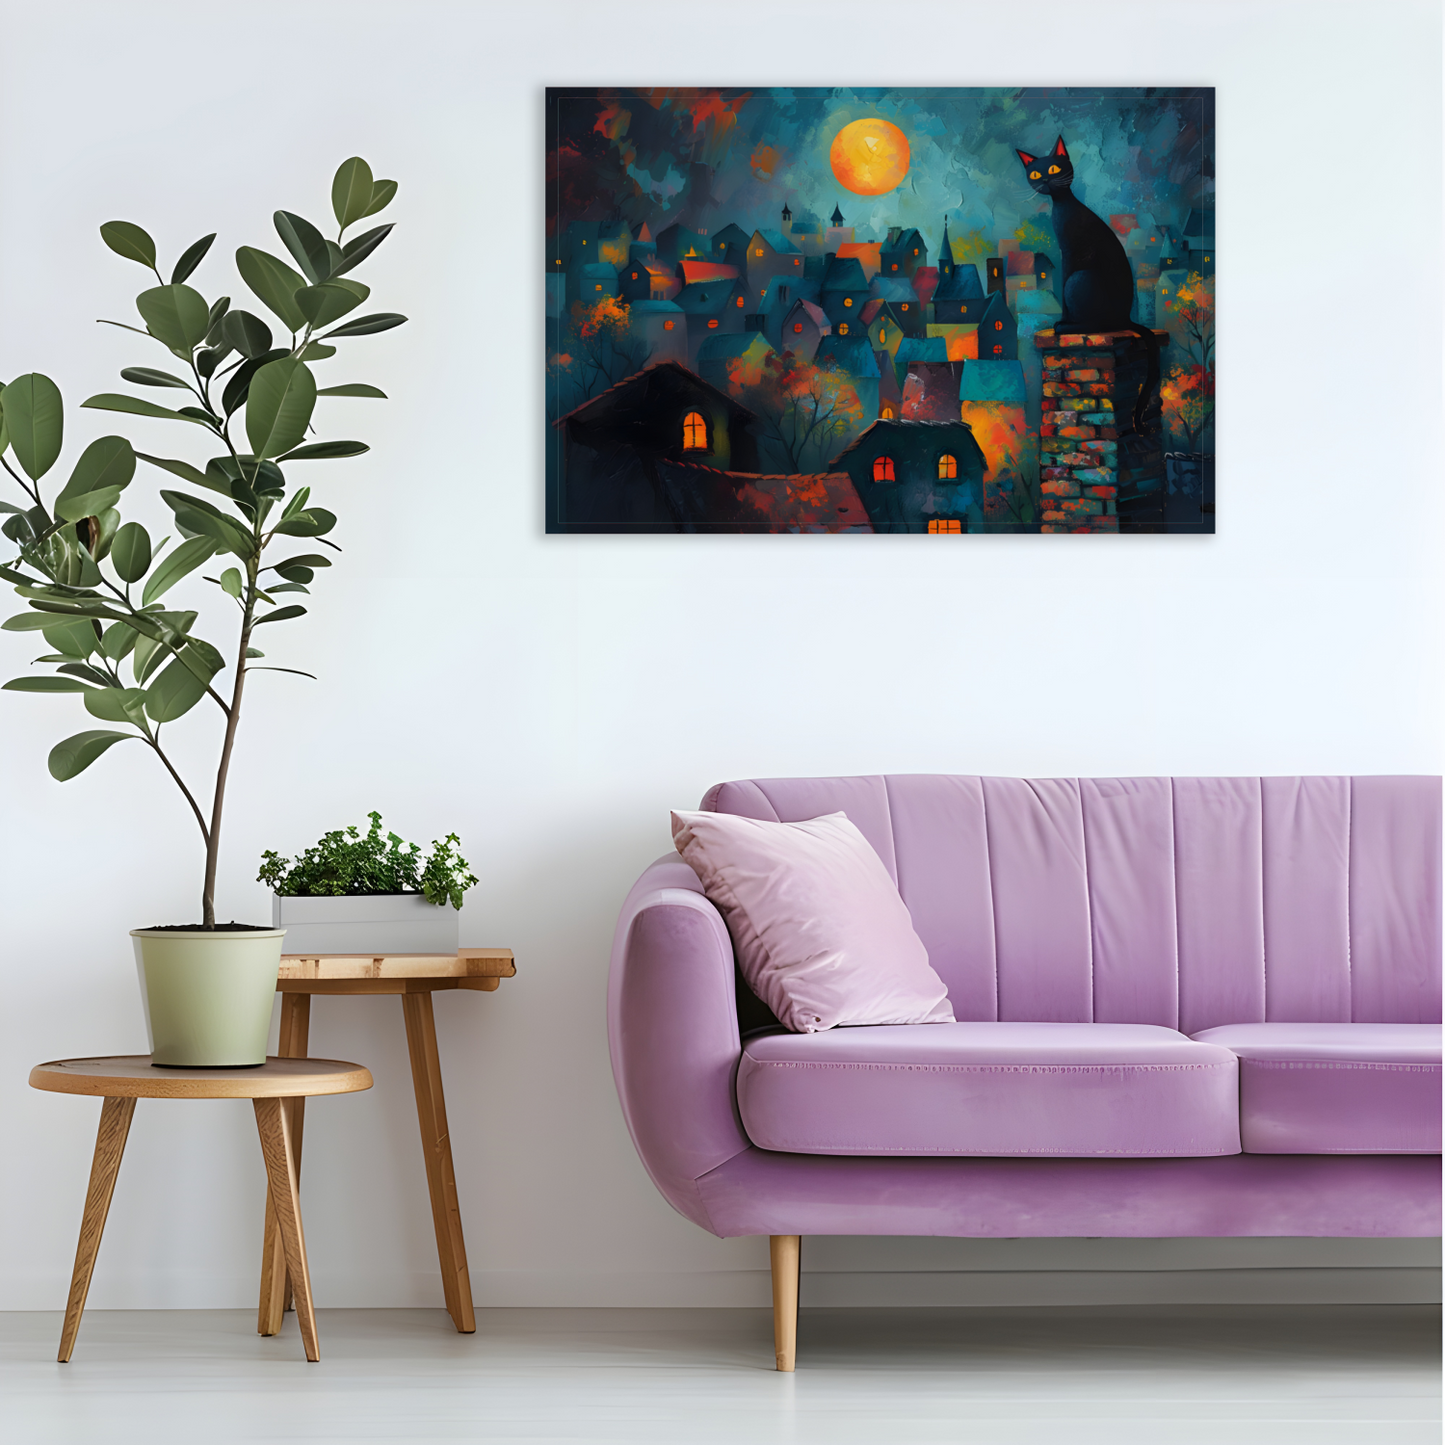 Twilight Over Rooftops  Deluxe Box Landscape Canvas Prints